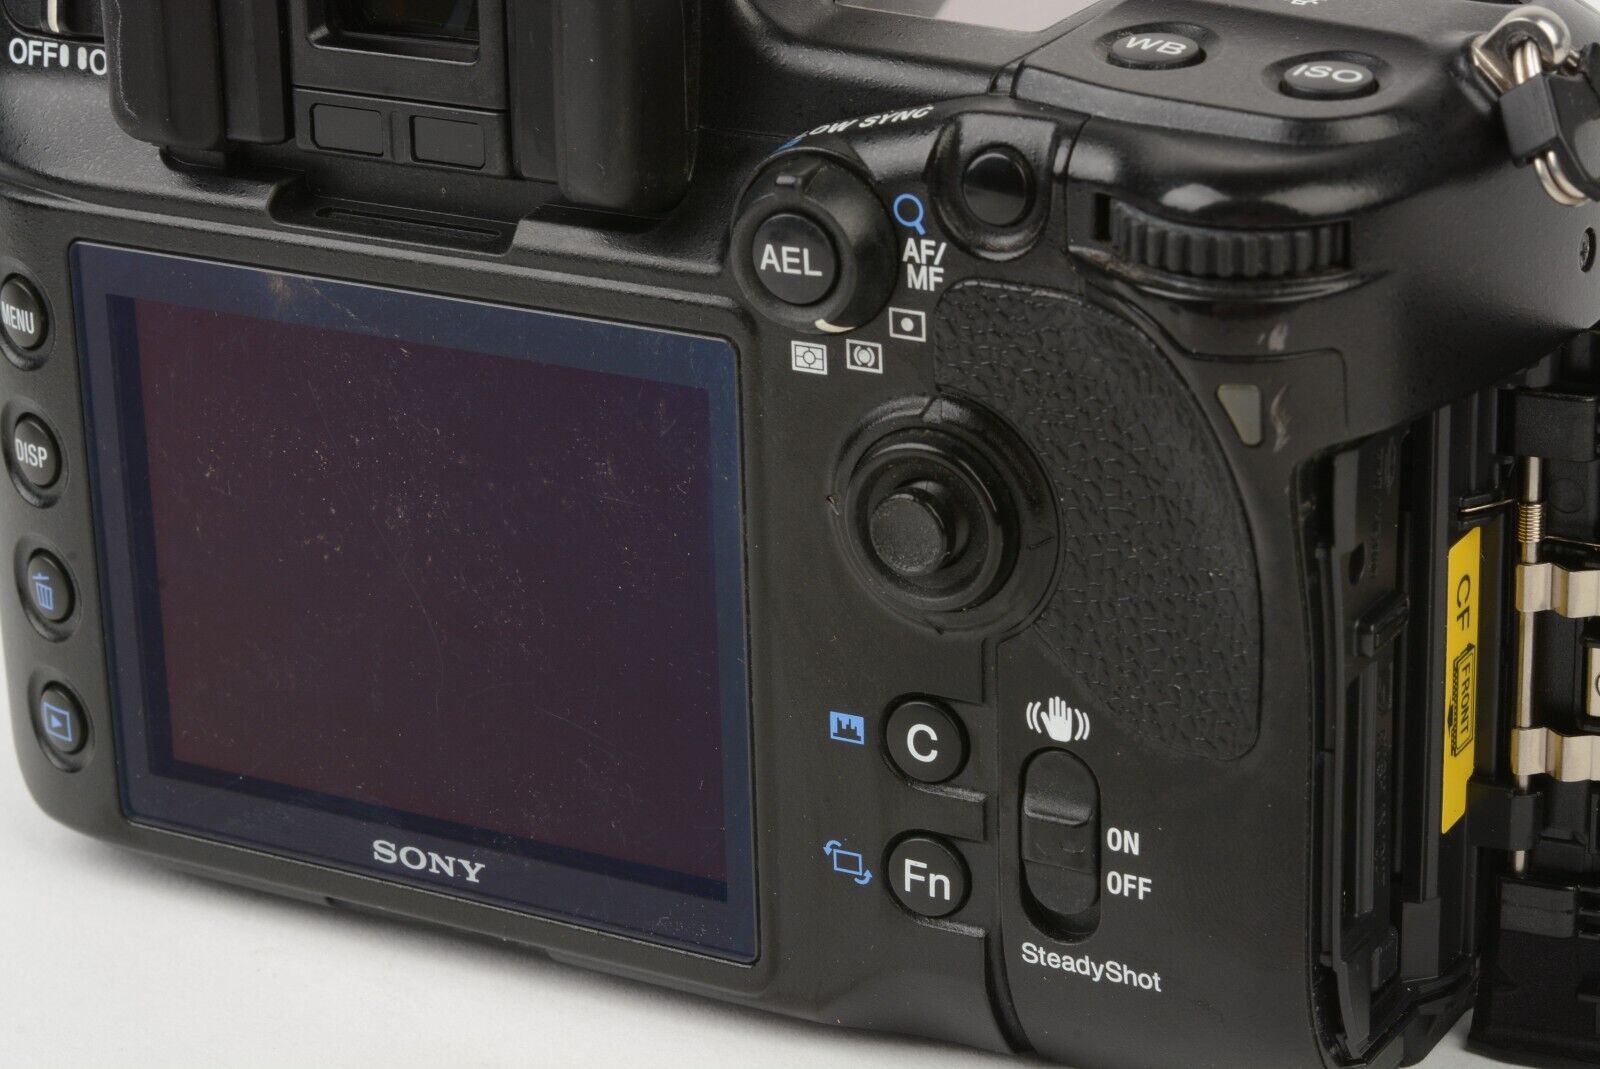 EXC++ SONY a900 24.6MP DSLR BODY, BATT+CHARGER+4GB CF+RRS PLATE 19K ACTS,  NICE